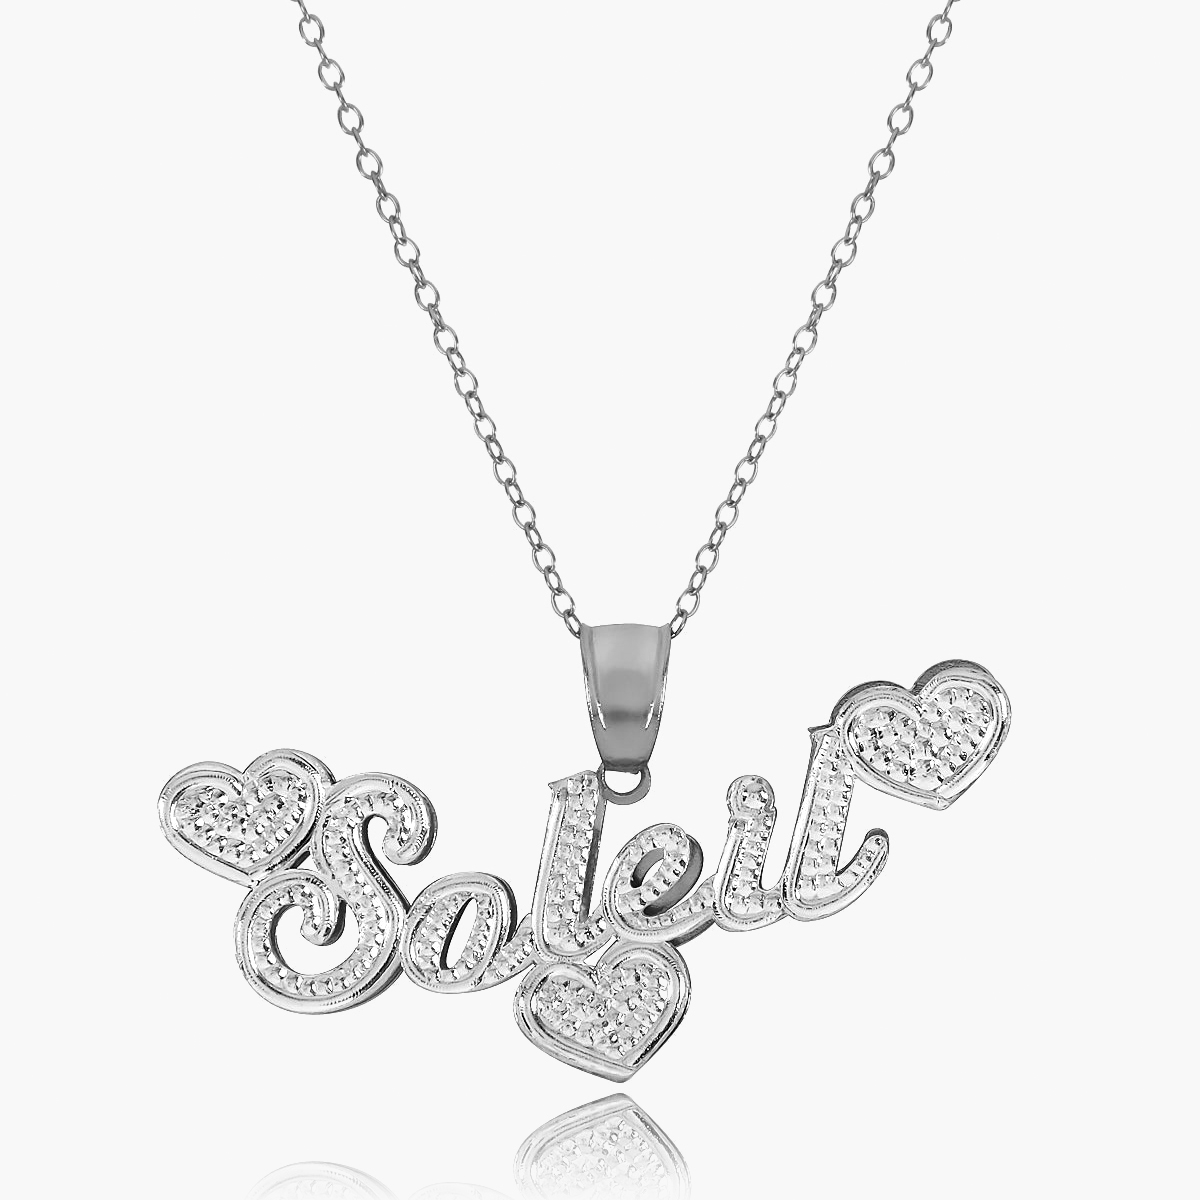 The Lovely Double Plated Name Necklace